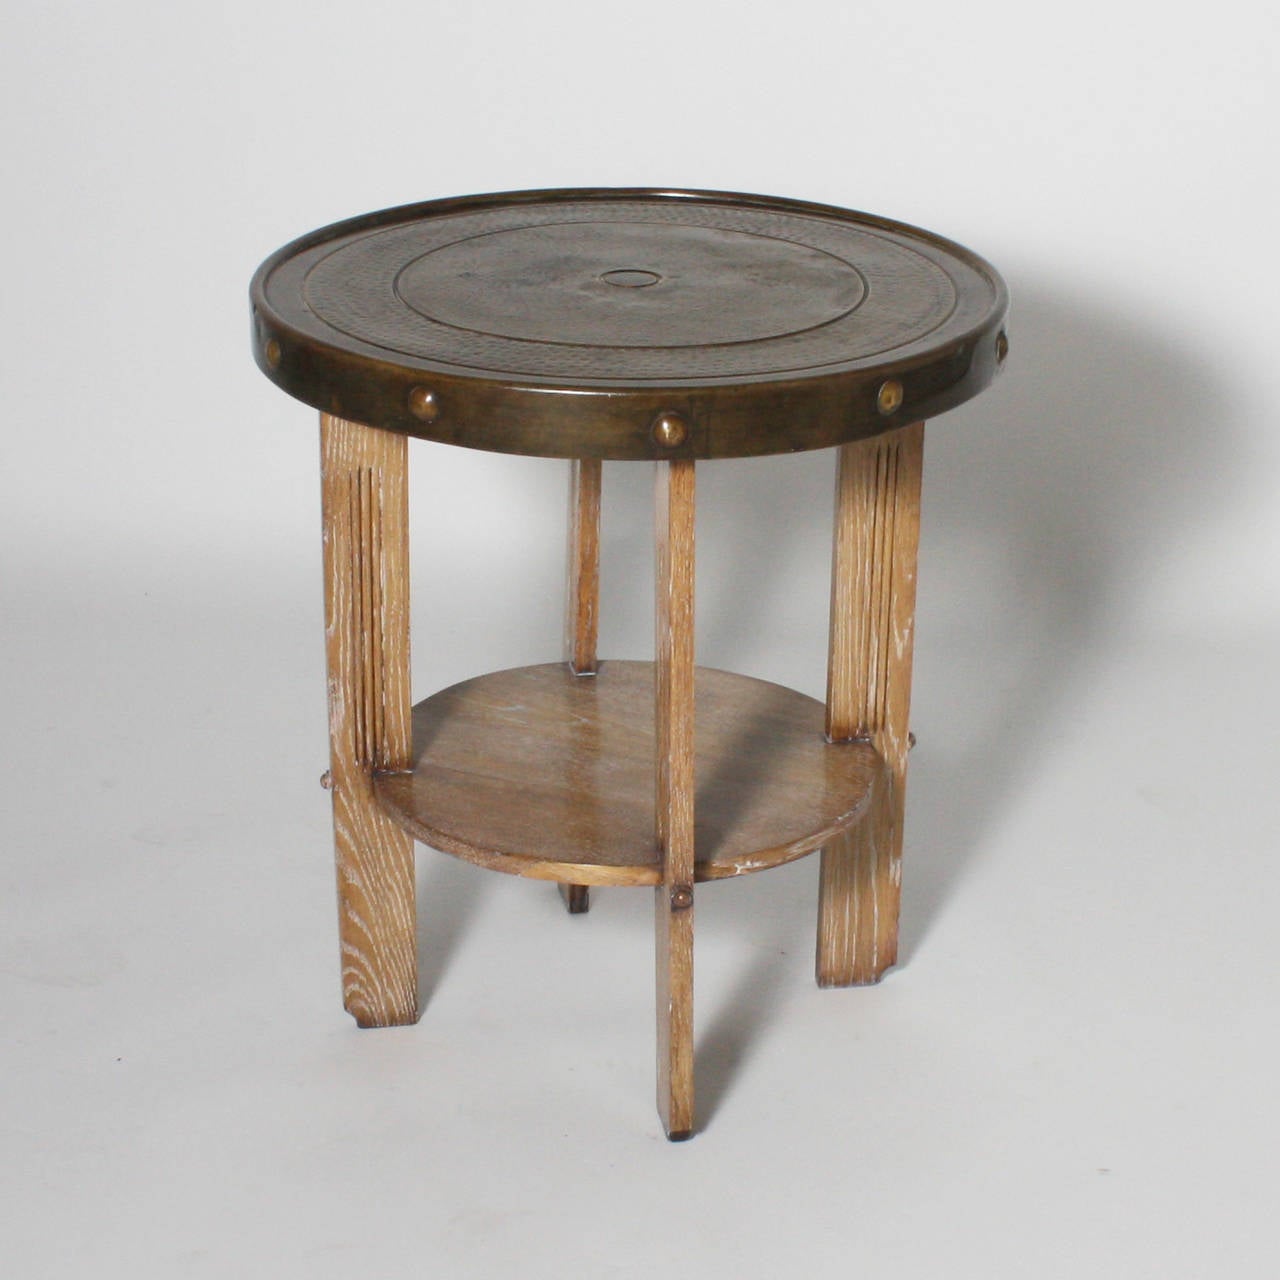 Cerused oak and hammered brass table